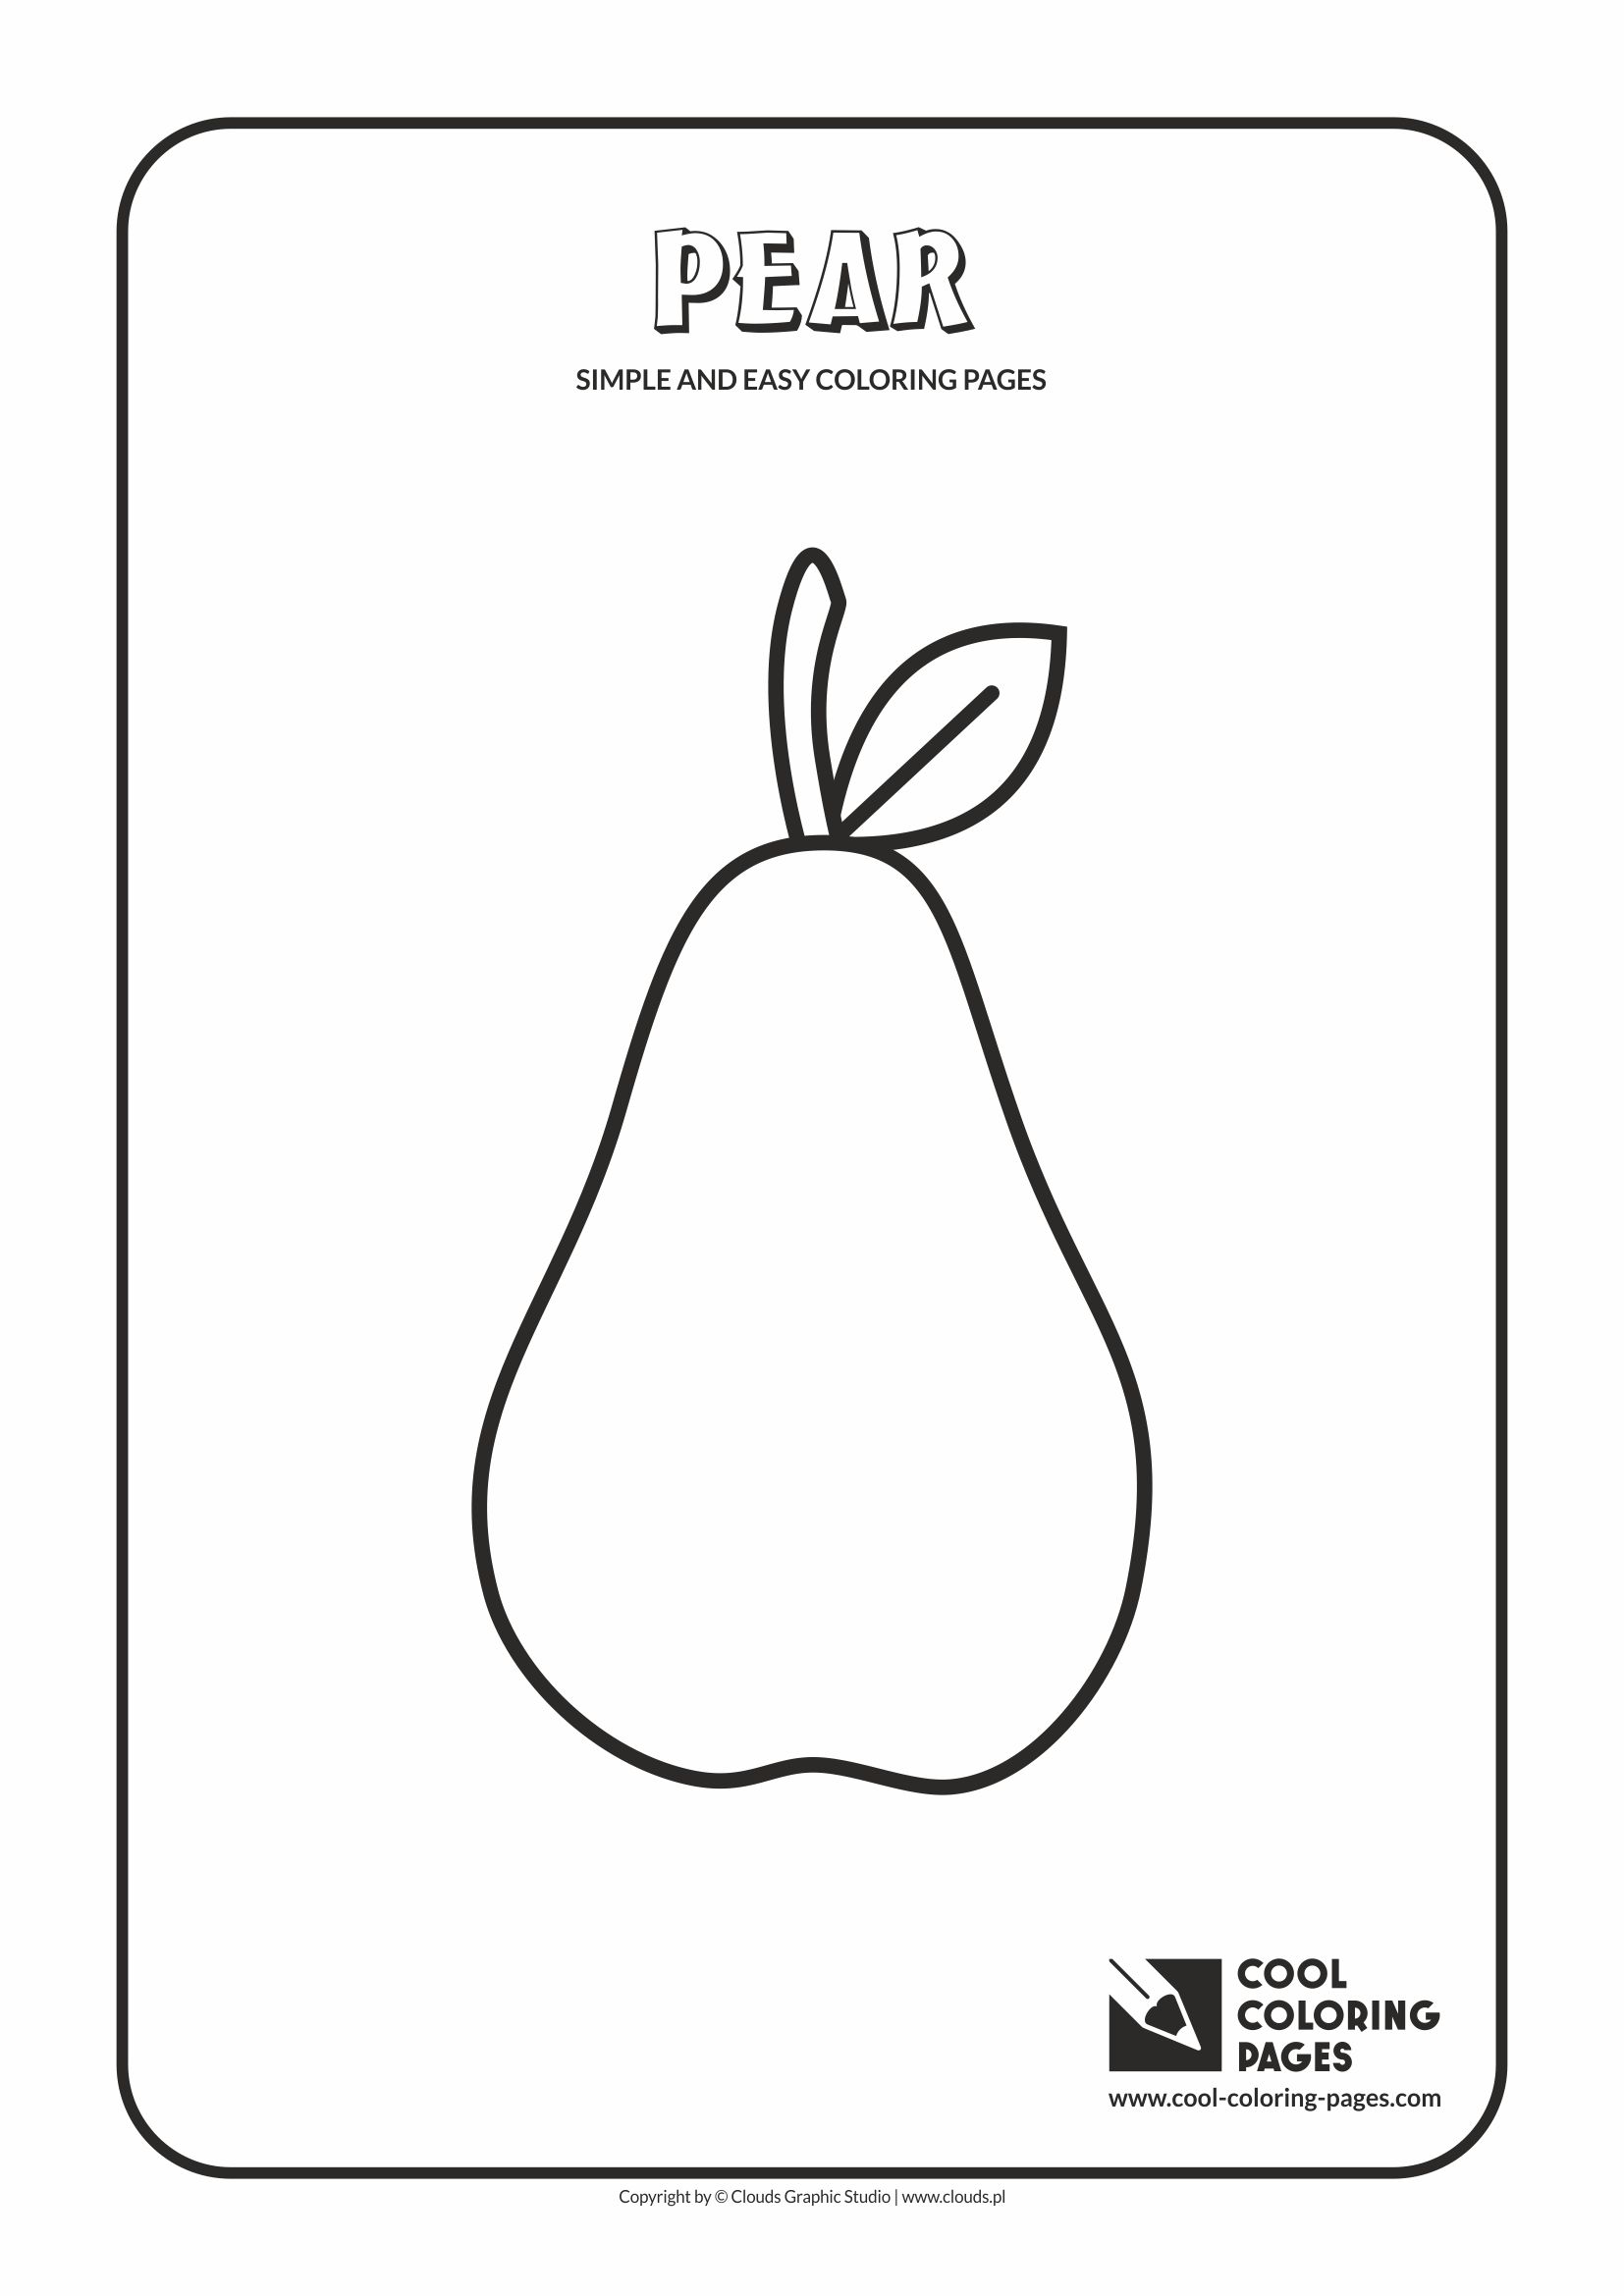 Simple and easy coloring pages for toddlers - Pear